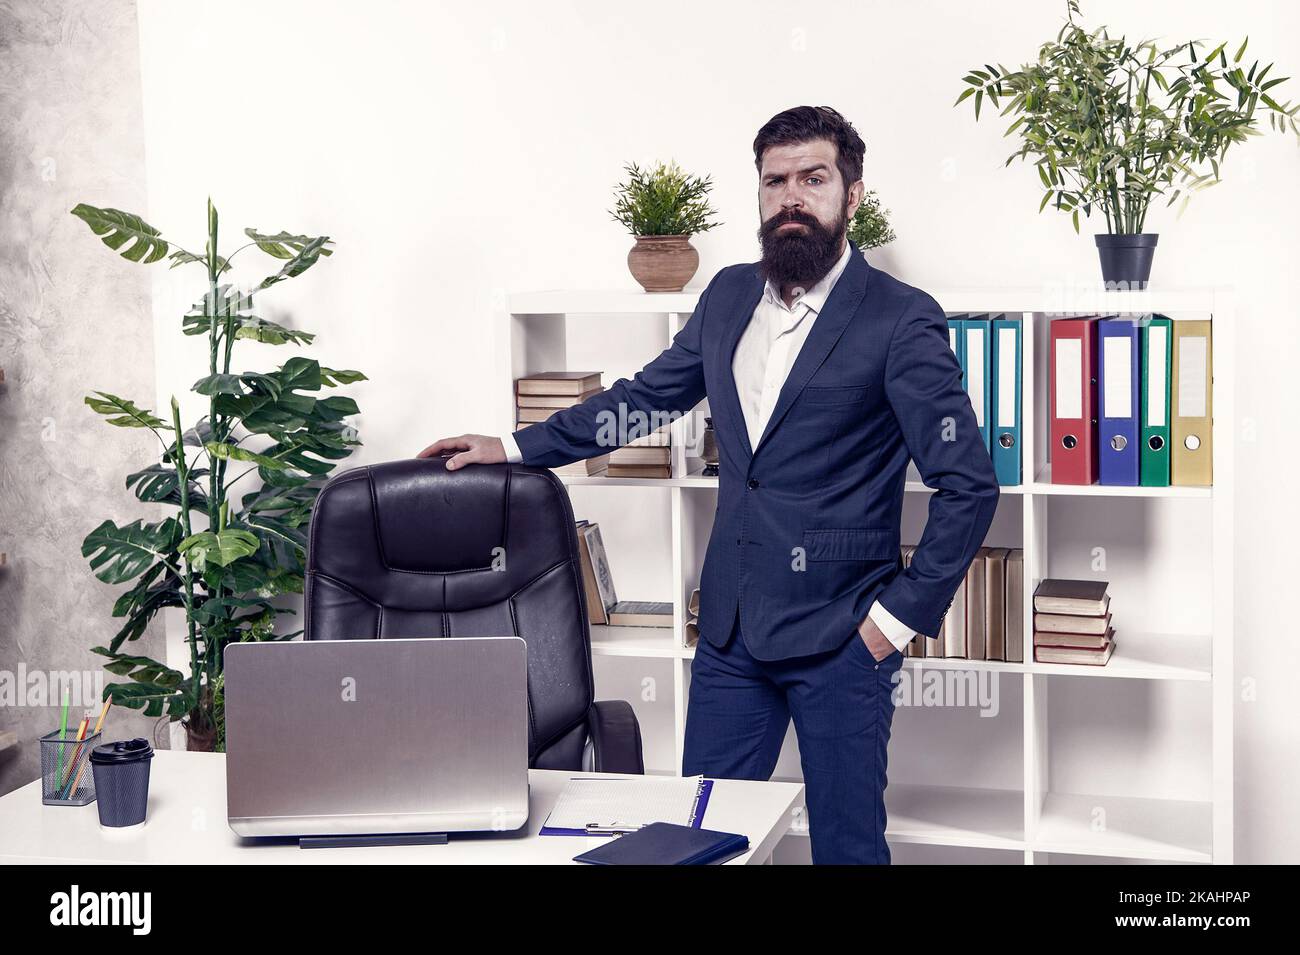 Vacant position. Human resource manager in office. Interviewer welcome job candidate. Man having job interview in company HR department. Empty chair Stock Photo